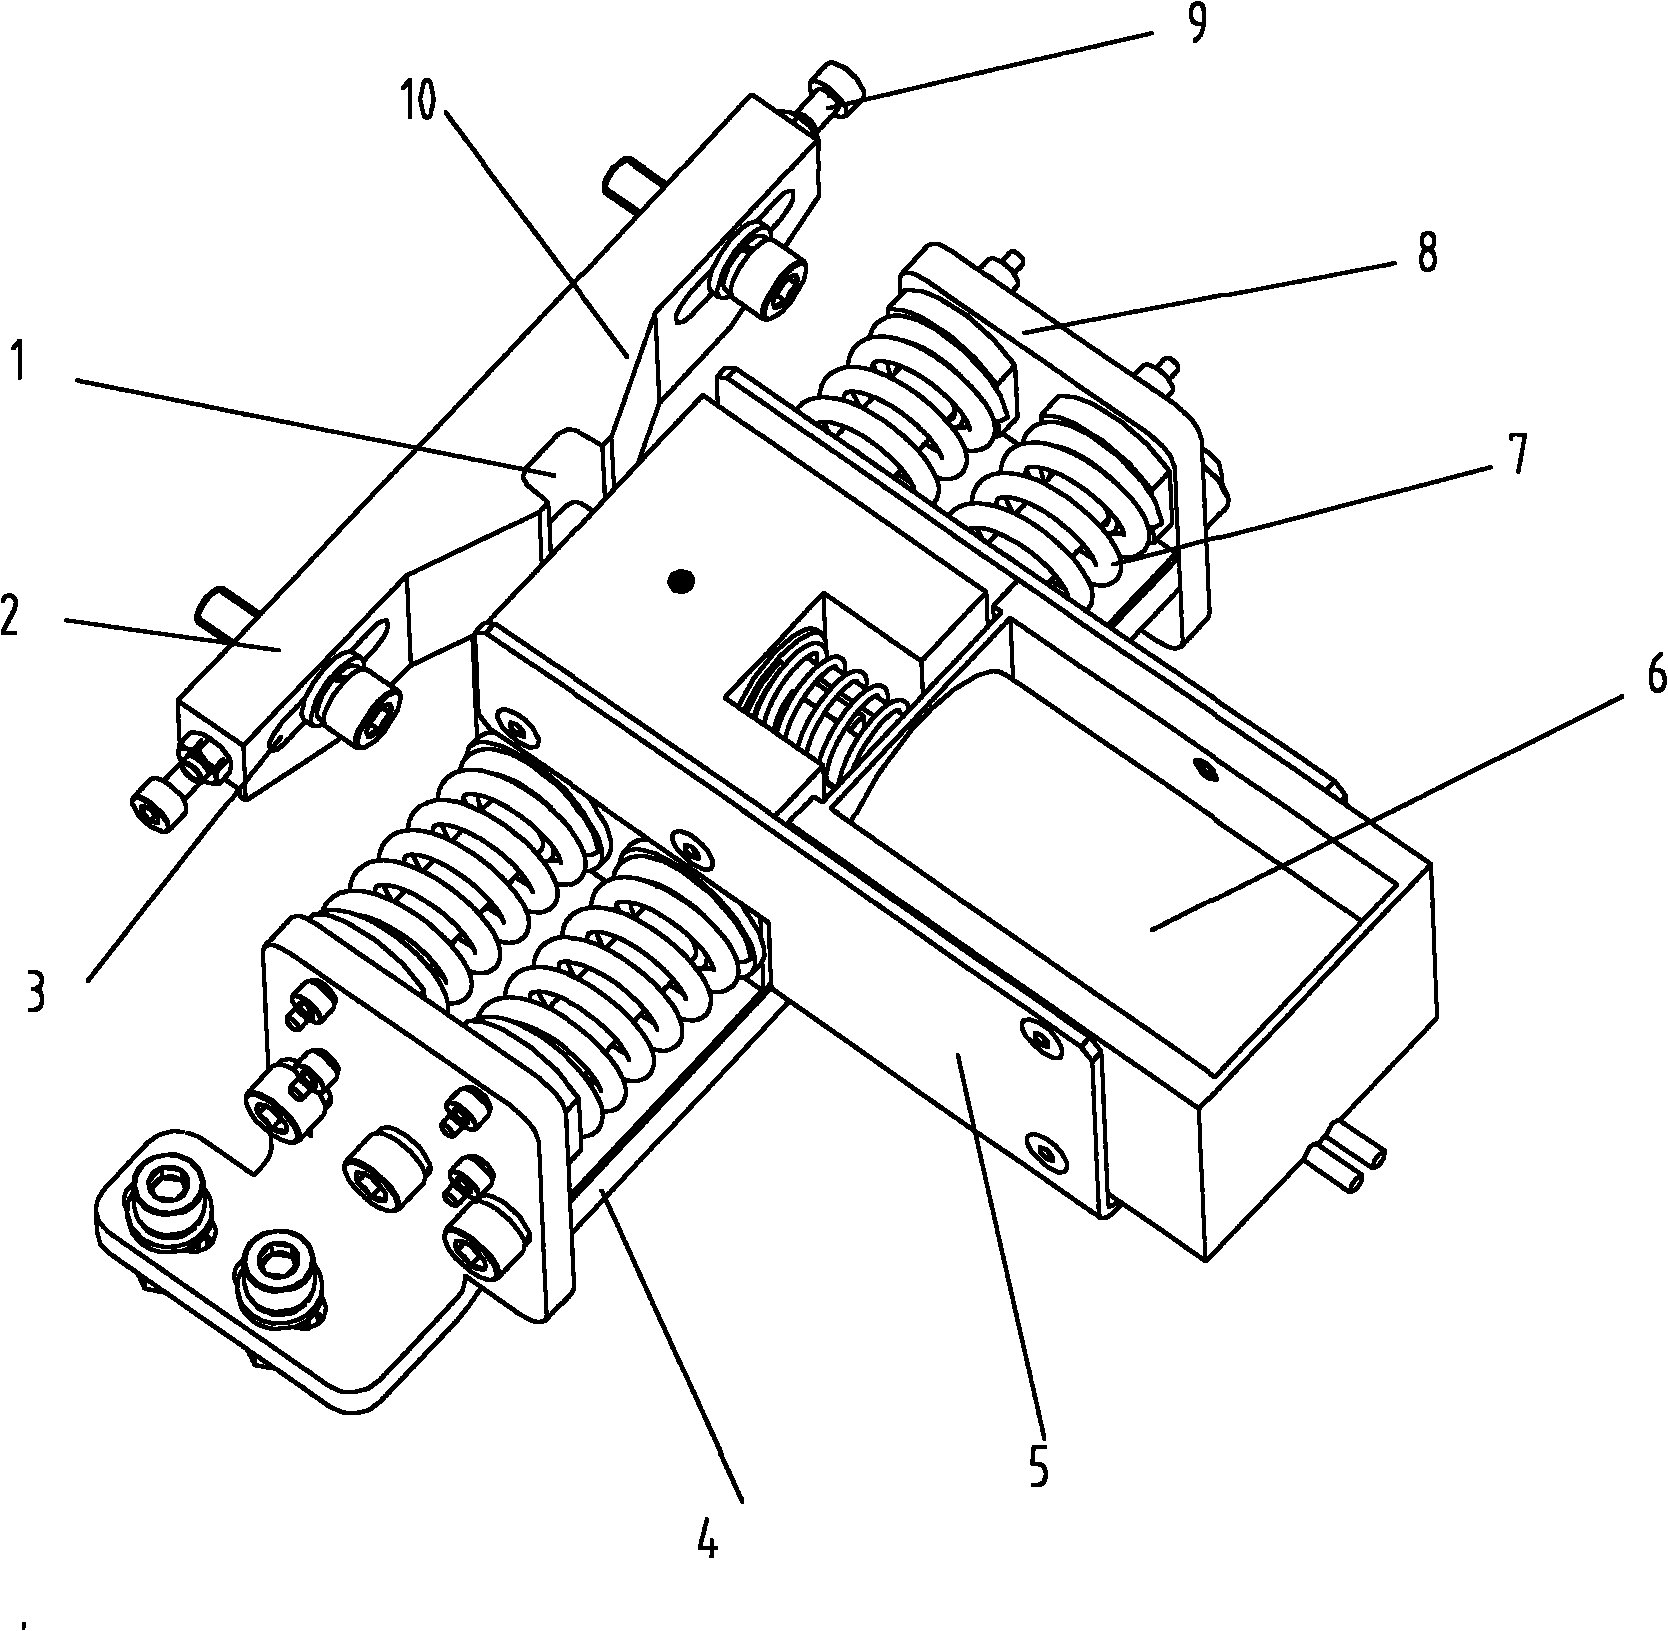 Positioning system of suspended medical device